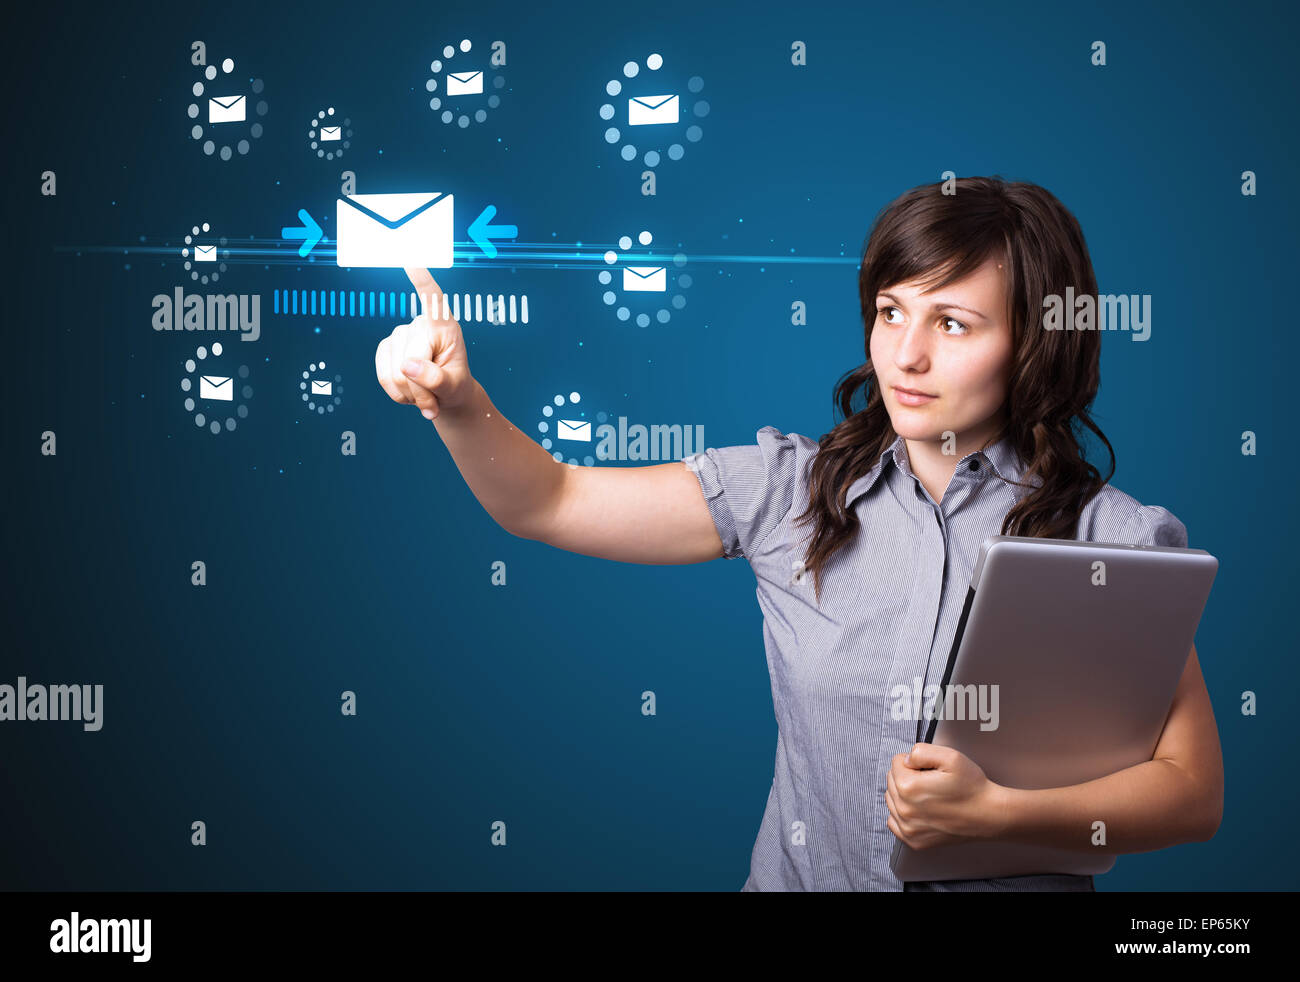 Businesswoman pressing virtual messaging type of icons Stock Photo